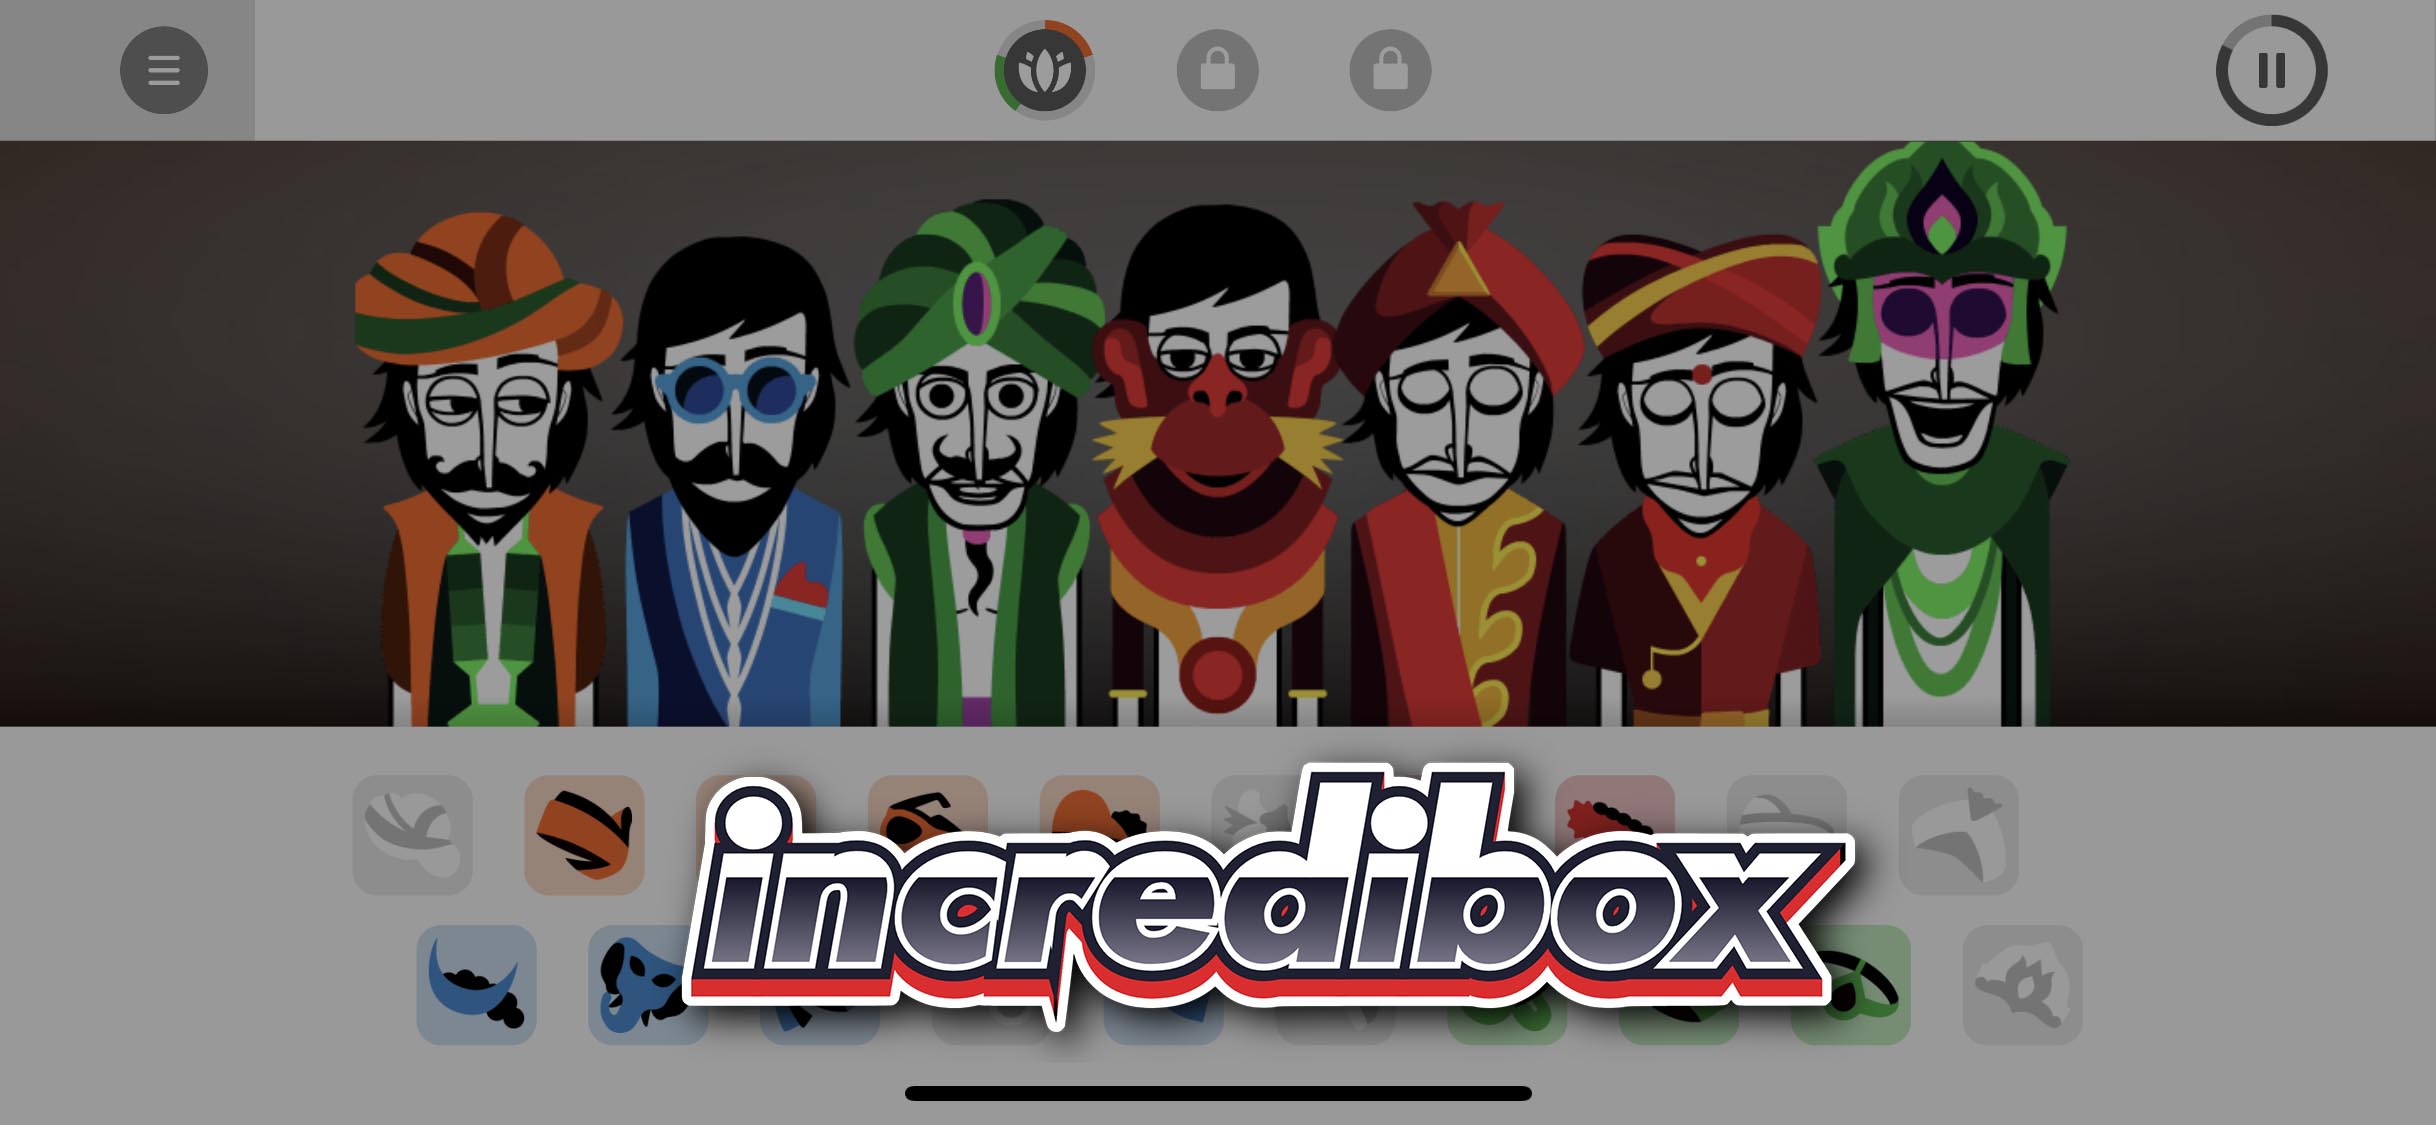 incrediboxgame.co-image-page-feature